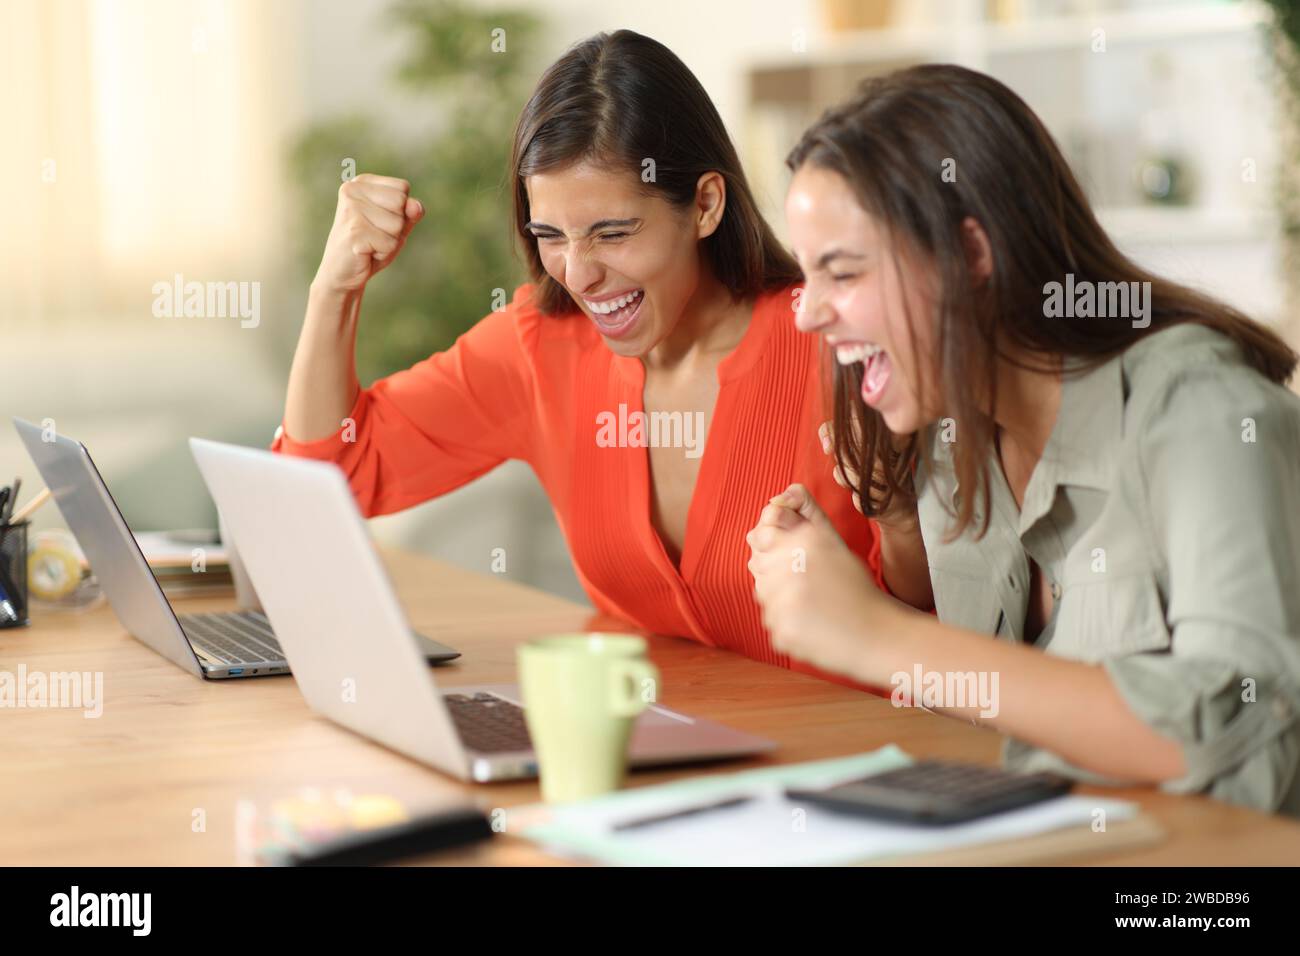 Two excited tele workers celebrating success online checking laptop at home Stock Photo